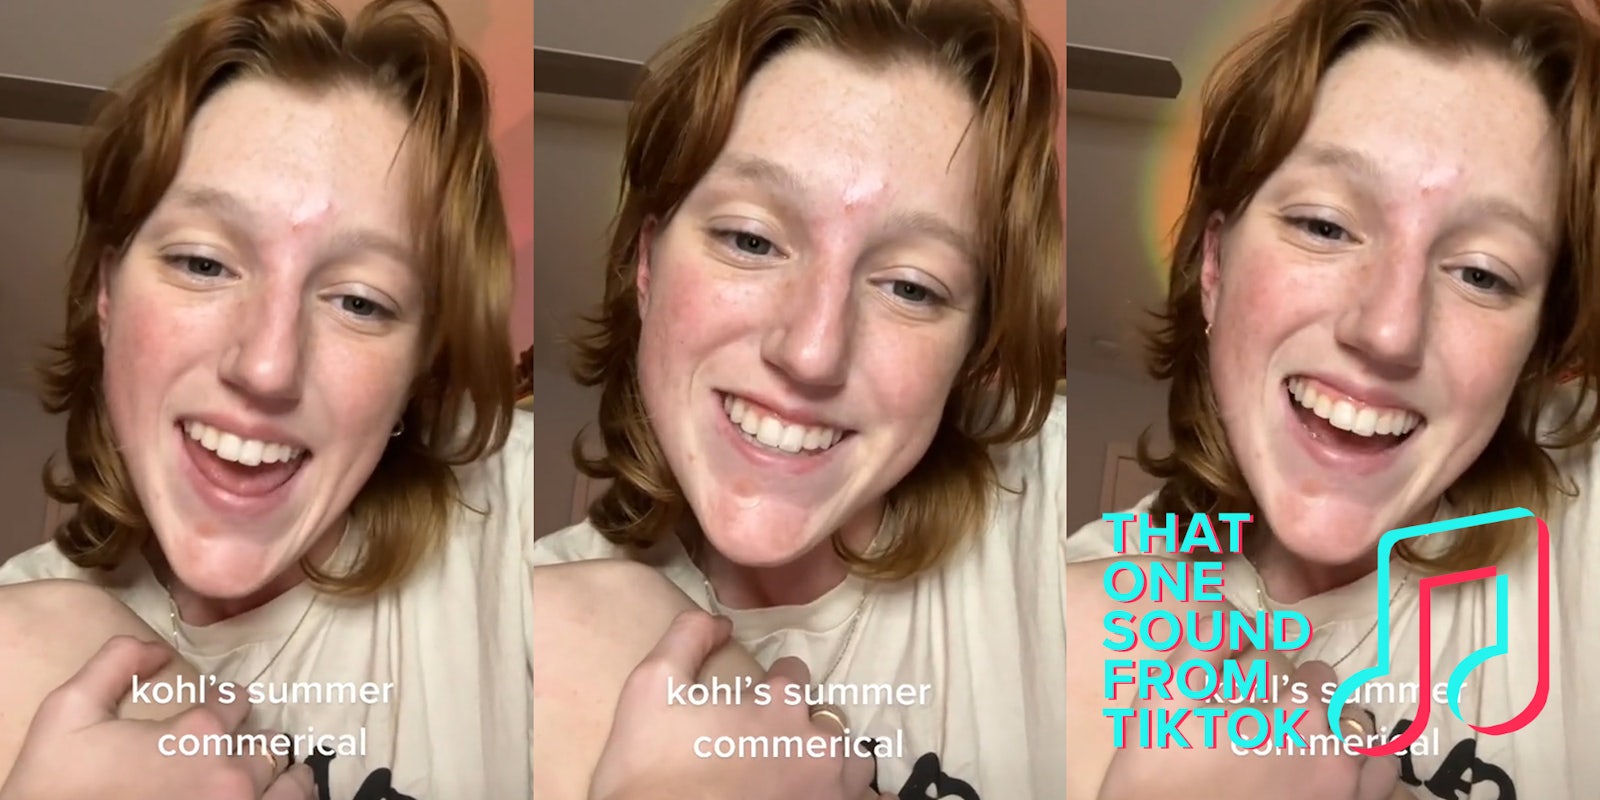 woman speaking with caption 'kohl's summer commercial' (l) woman speaking with caption 'kohl's summer commercial' (c) woman speaking with caption 'kohl's summer commercial' with That One Sound From TikTok logo (r)